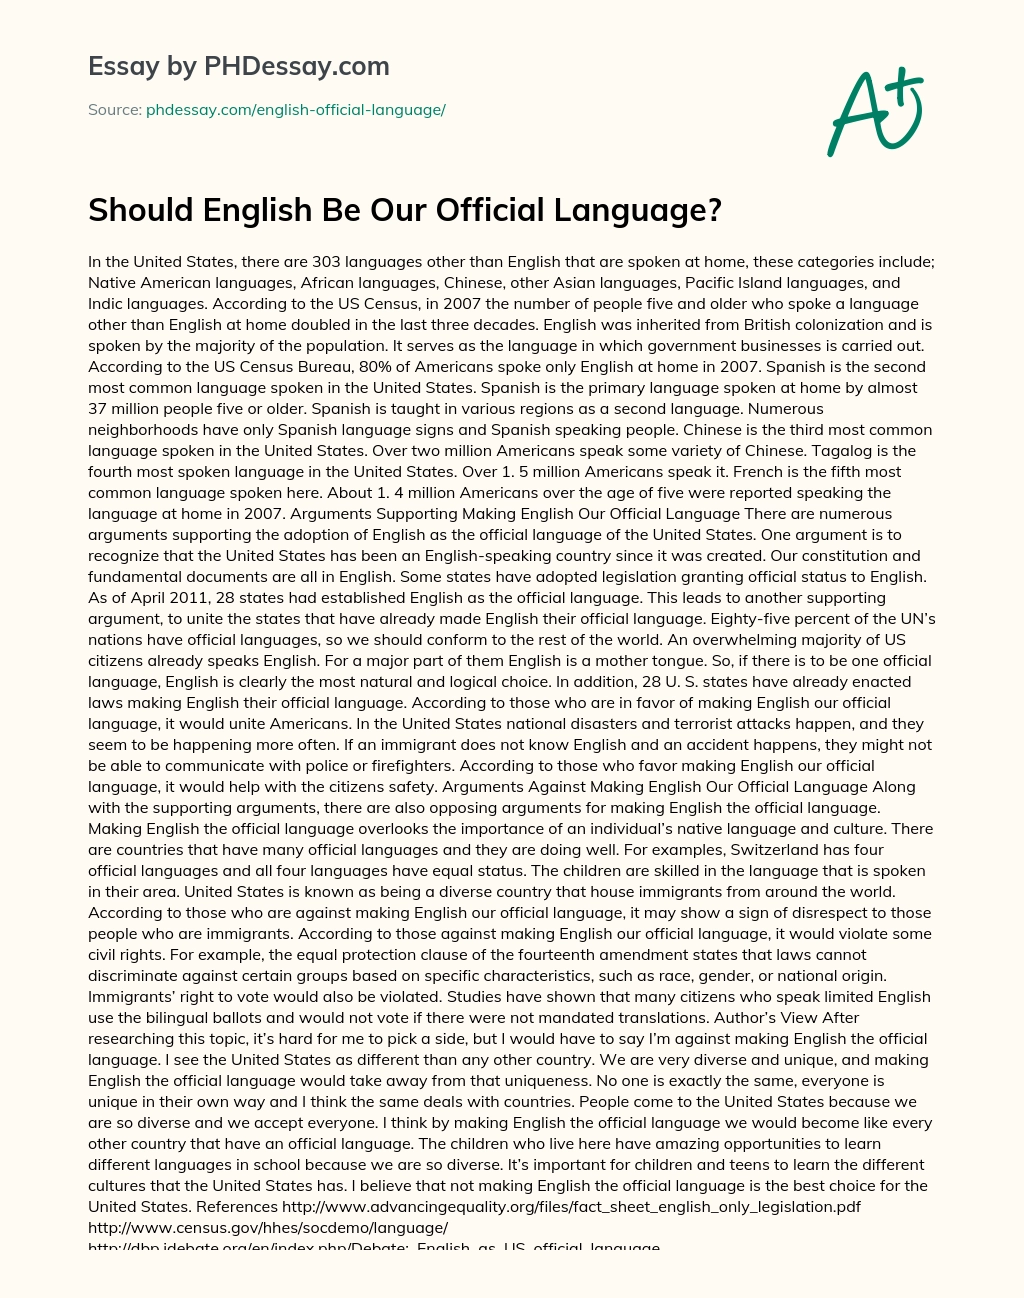 Should English Be Our Official Language? essay